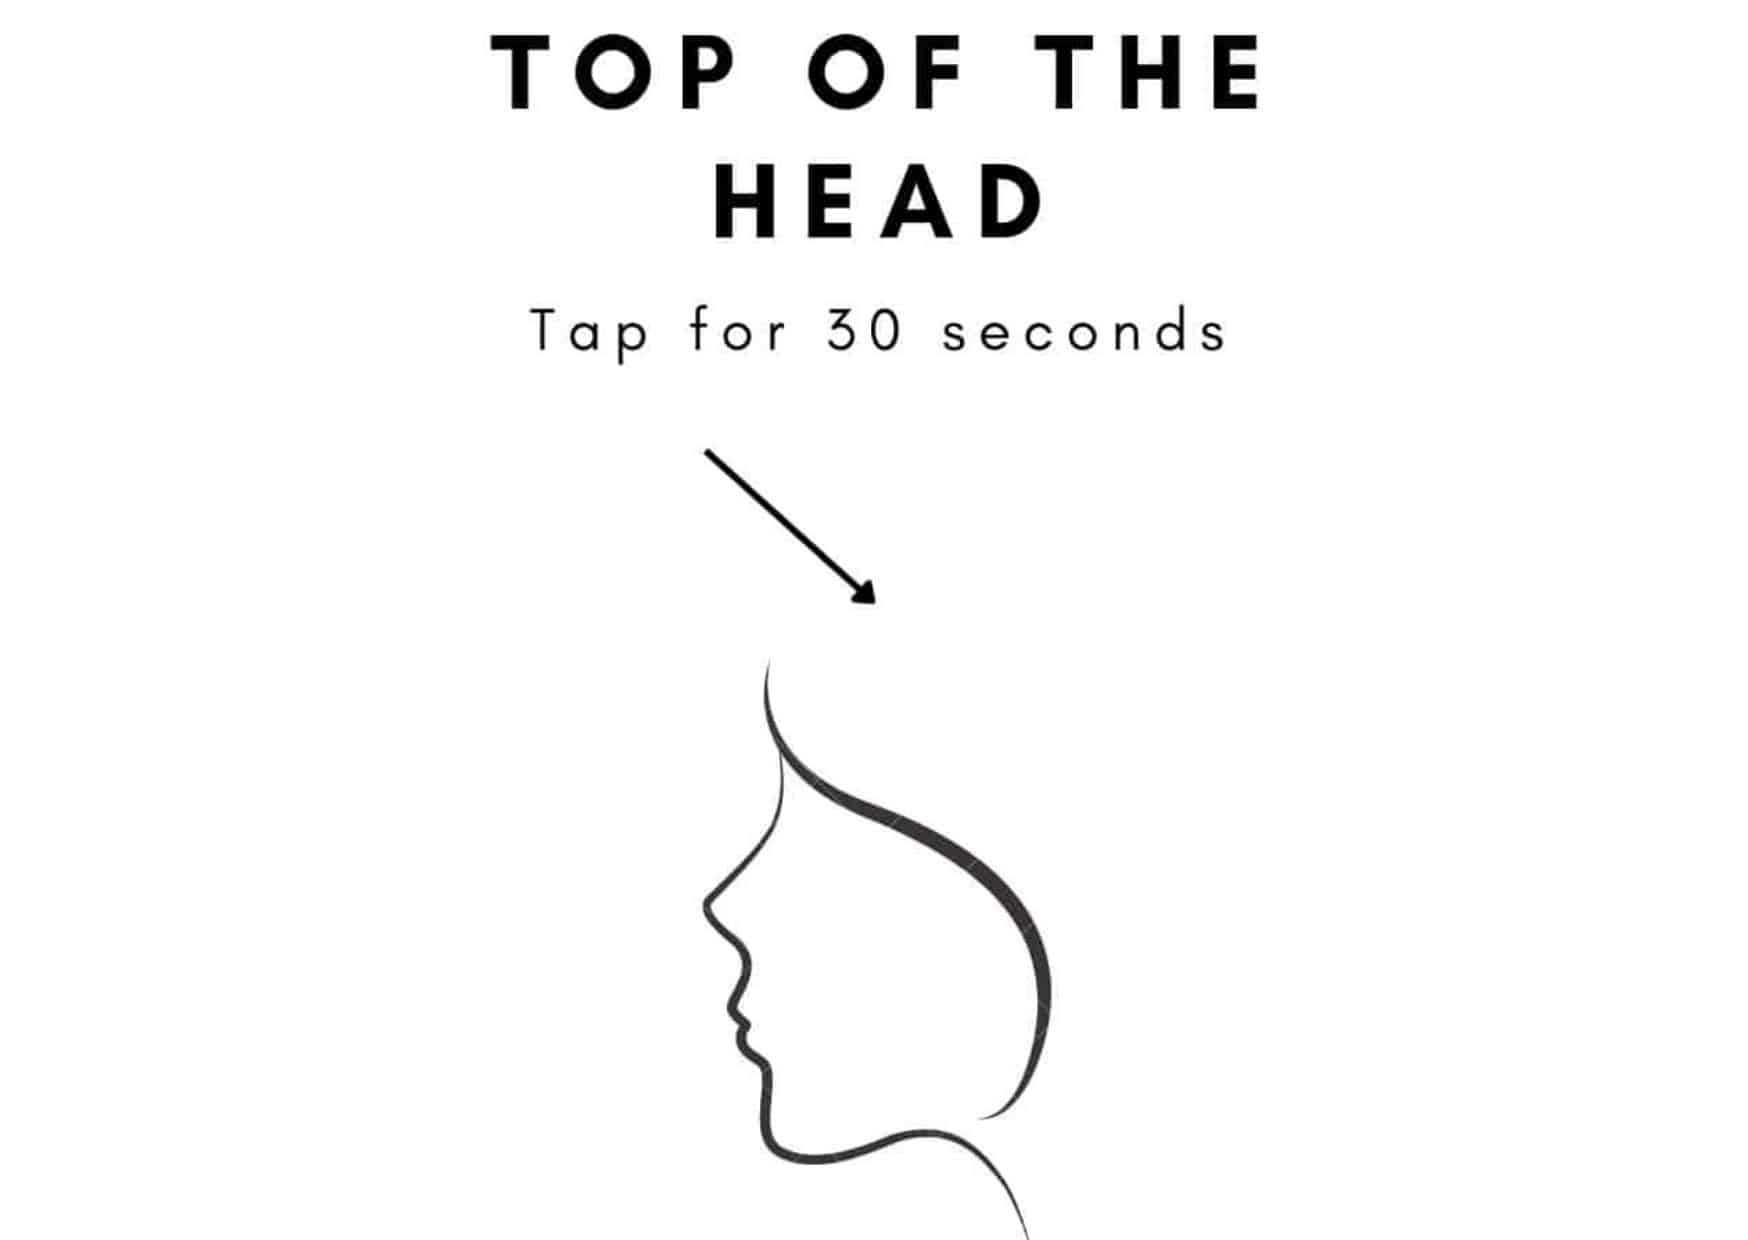 tapping the top of the head